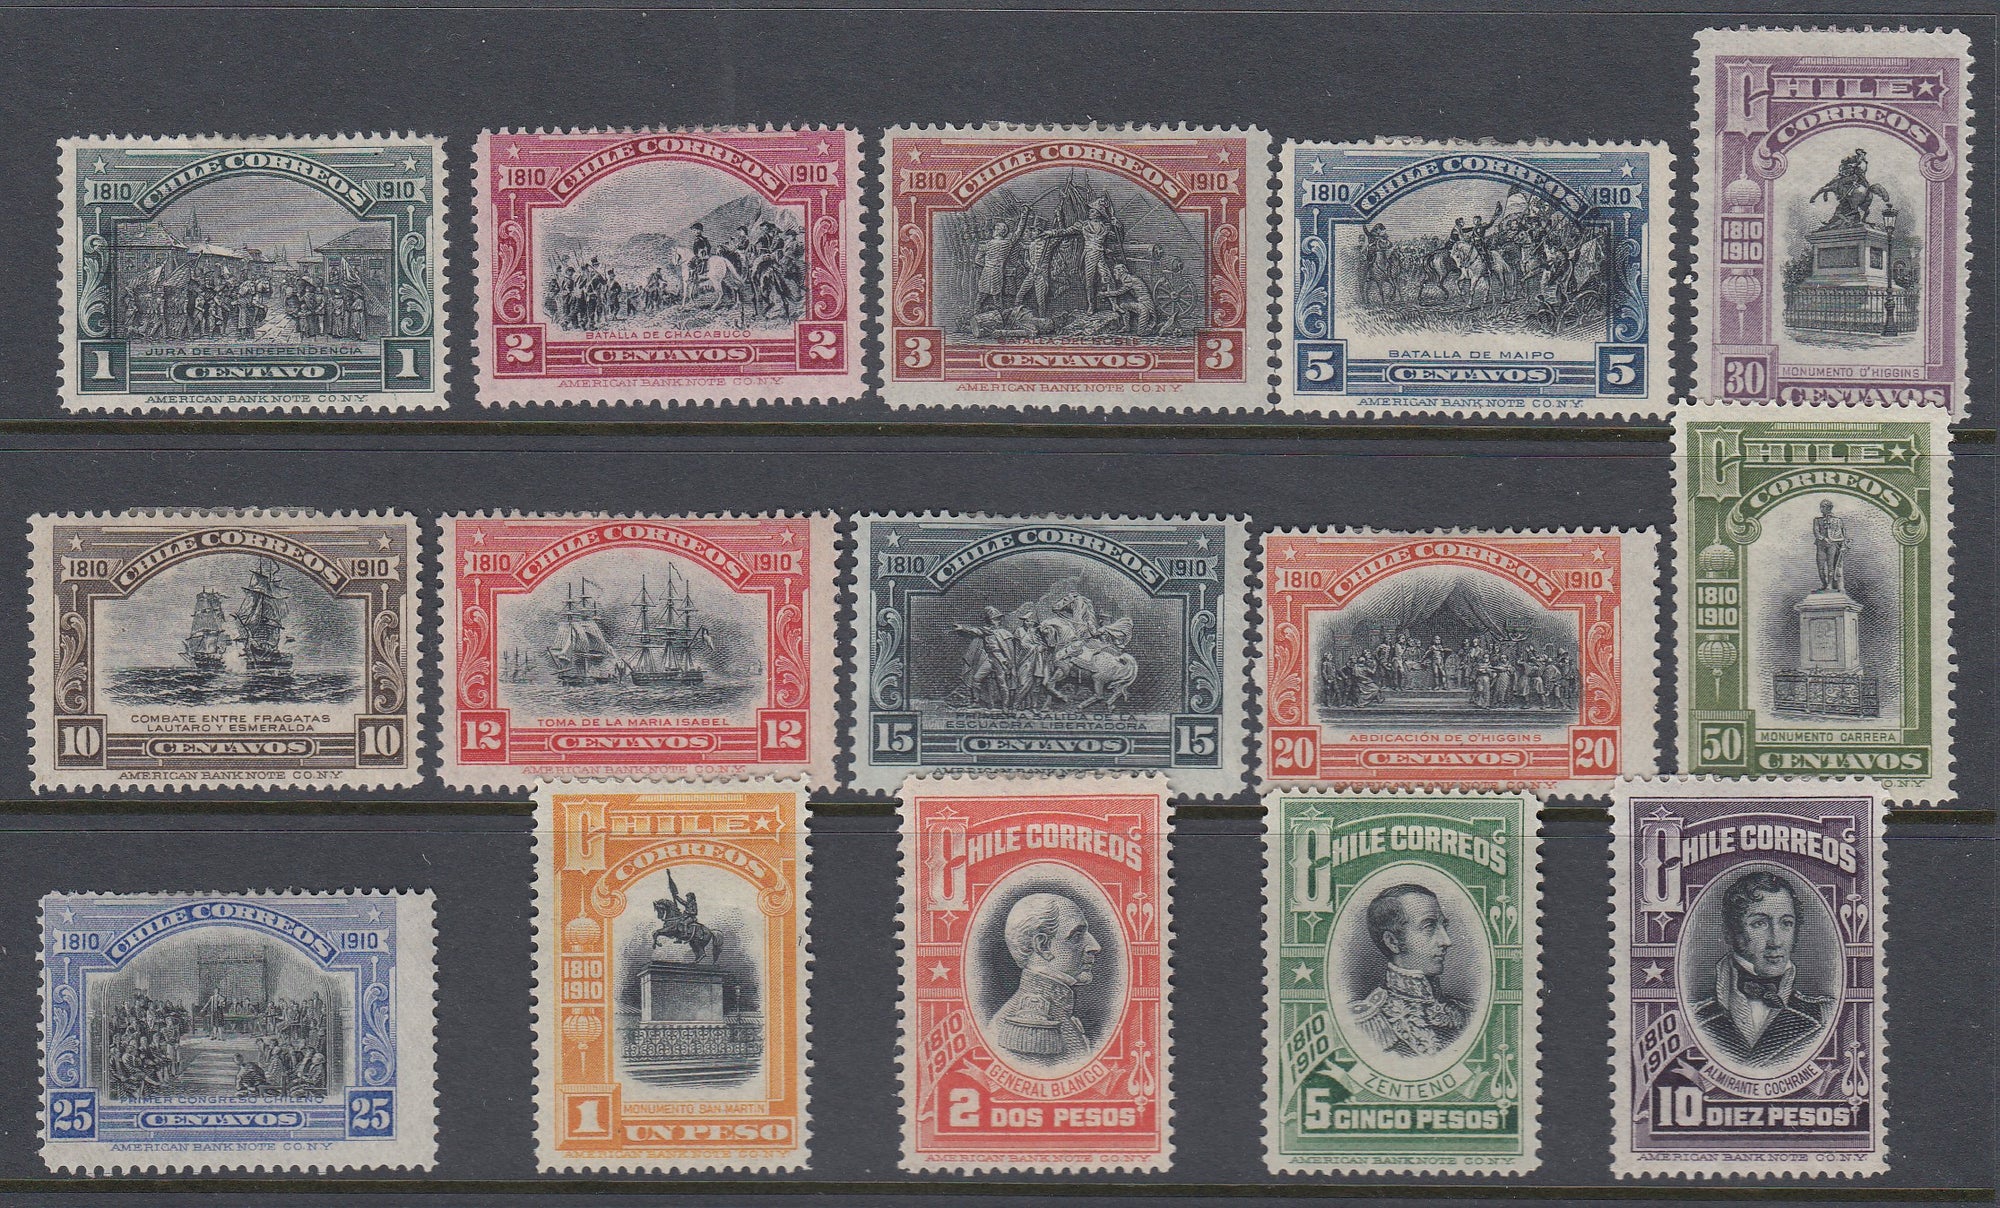 Chile 1910 Independence Centenary Complete Set M Mint. Scott 83-97